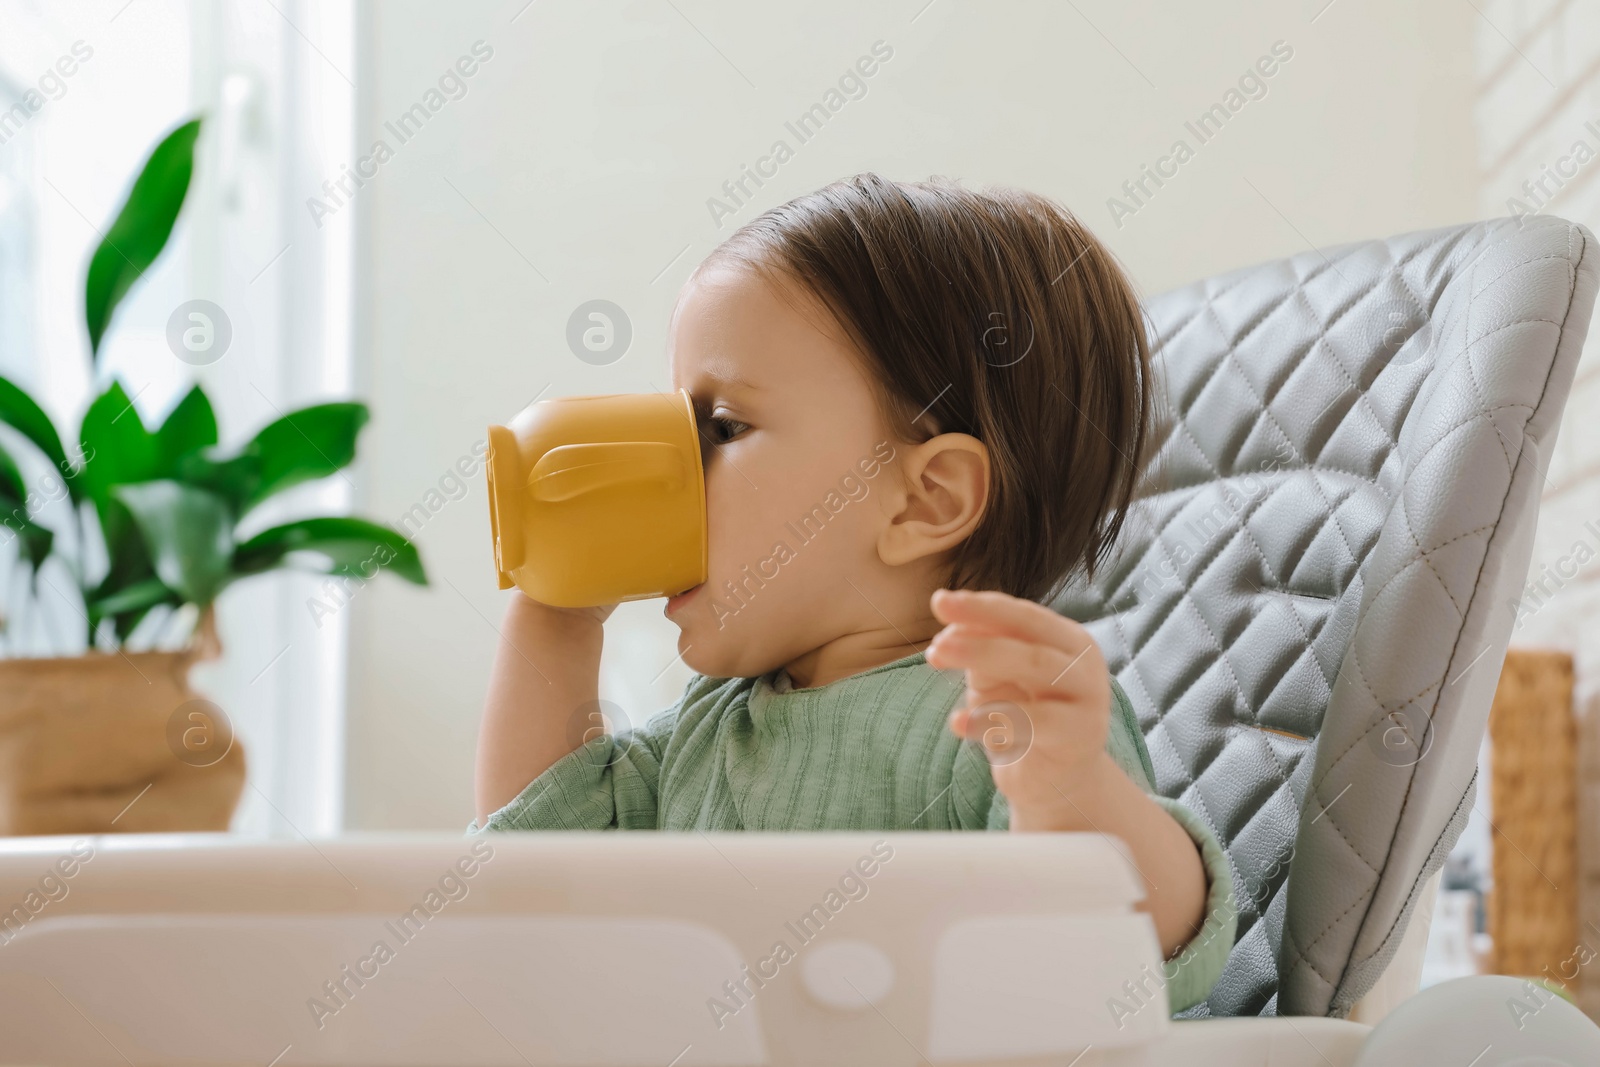 Photo of Cute little baby drinking from cup in high chair indoors